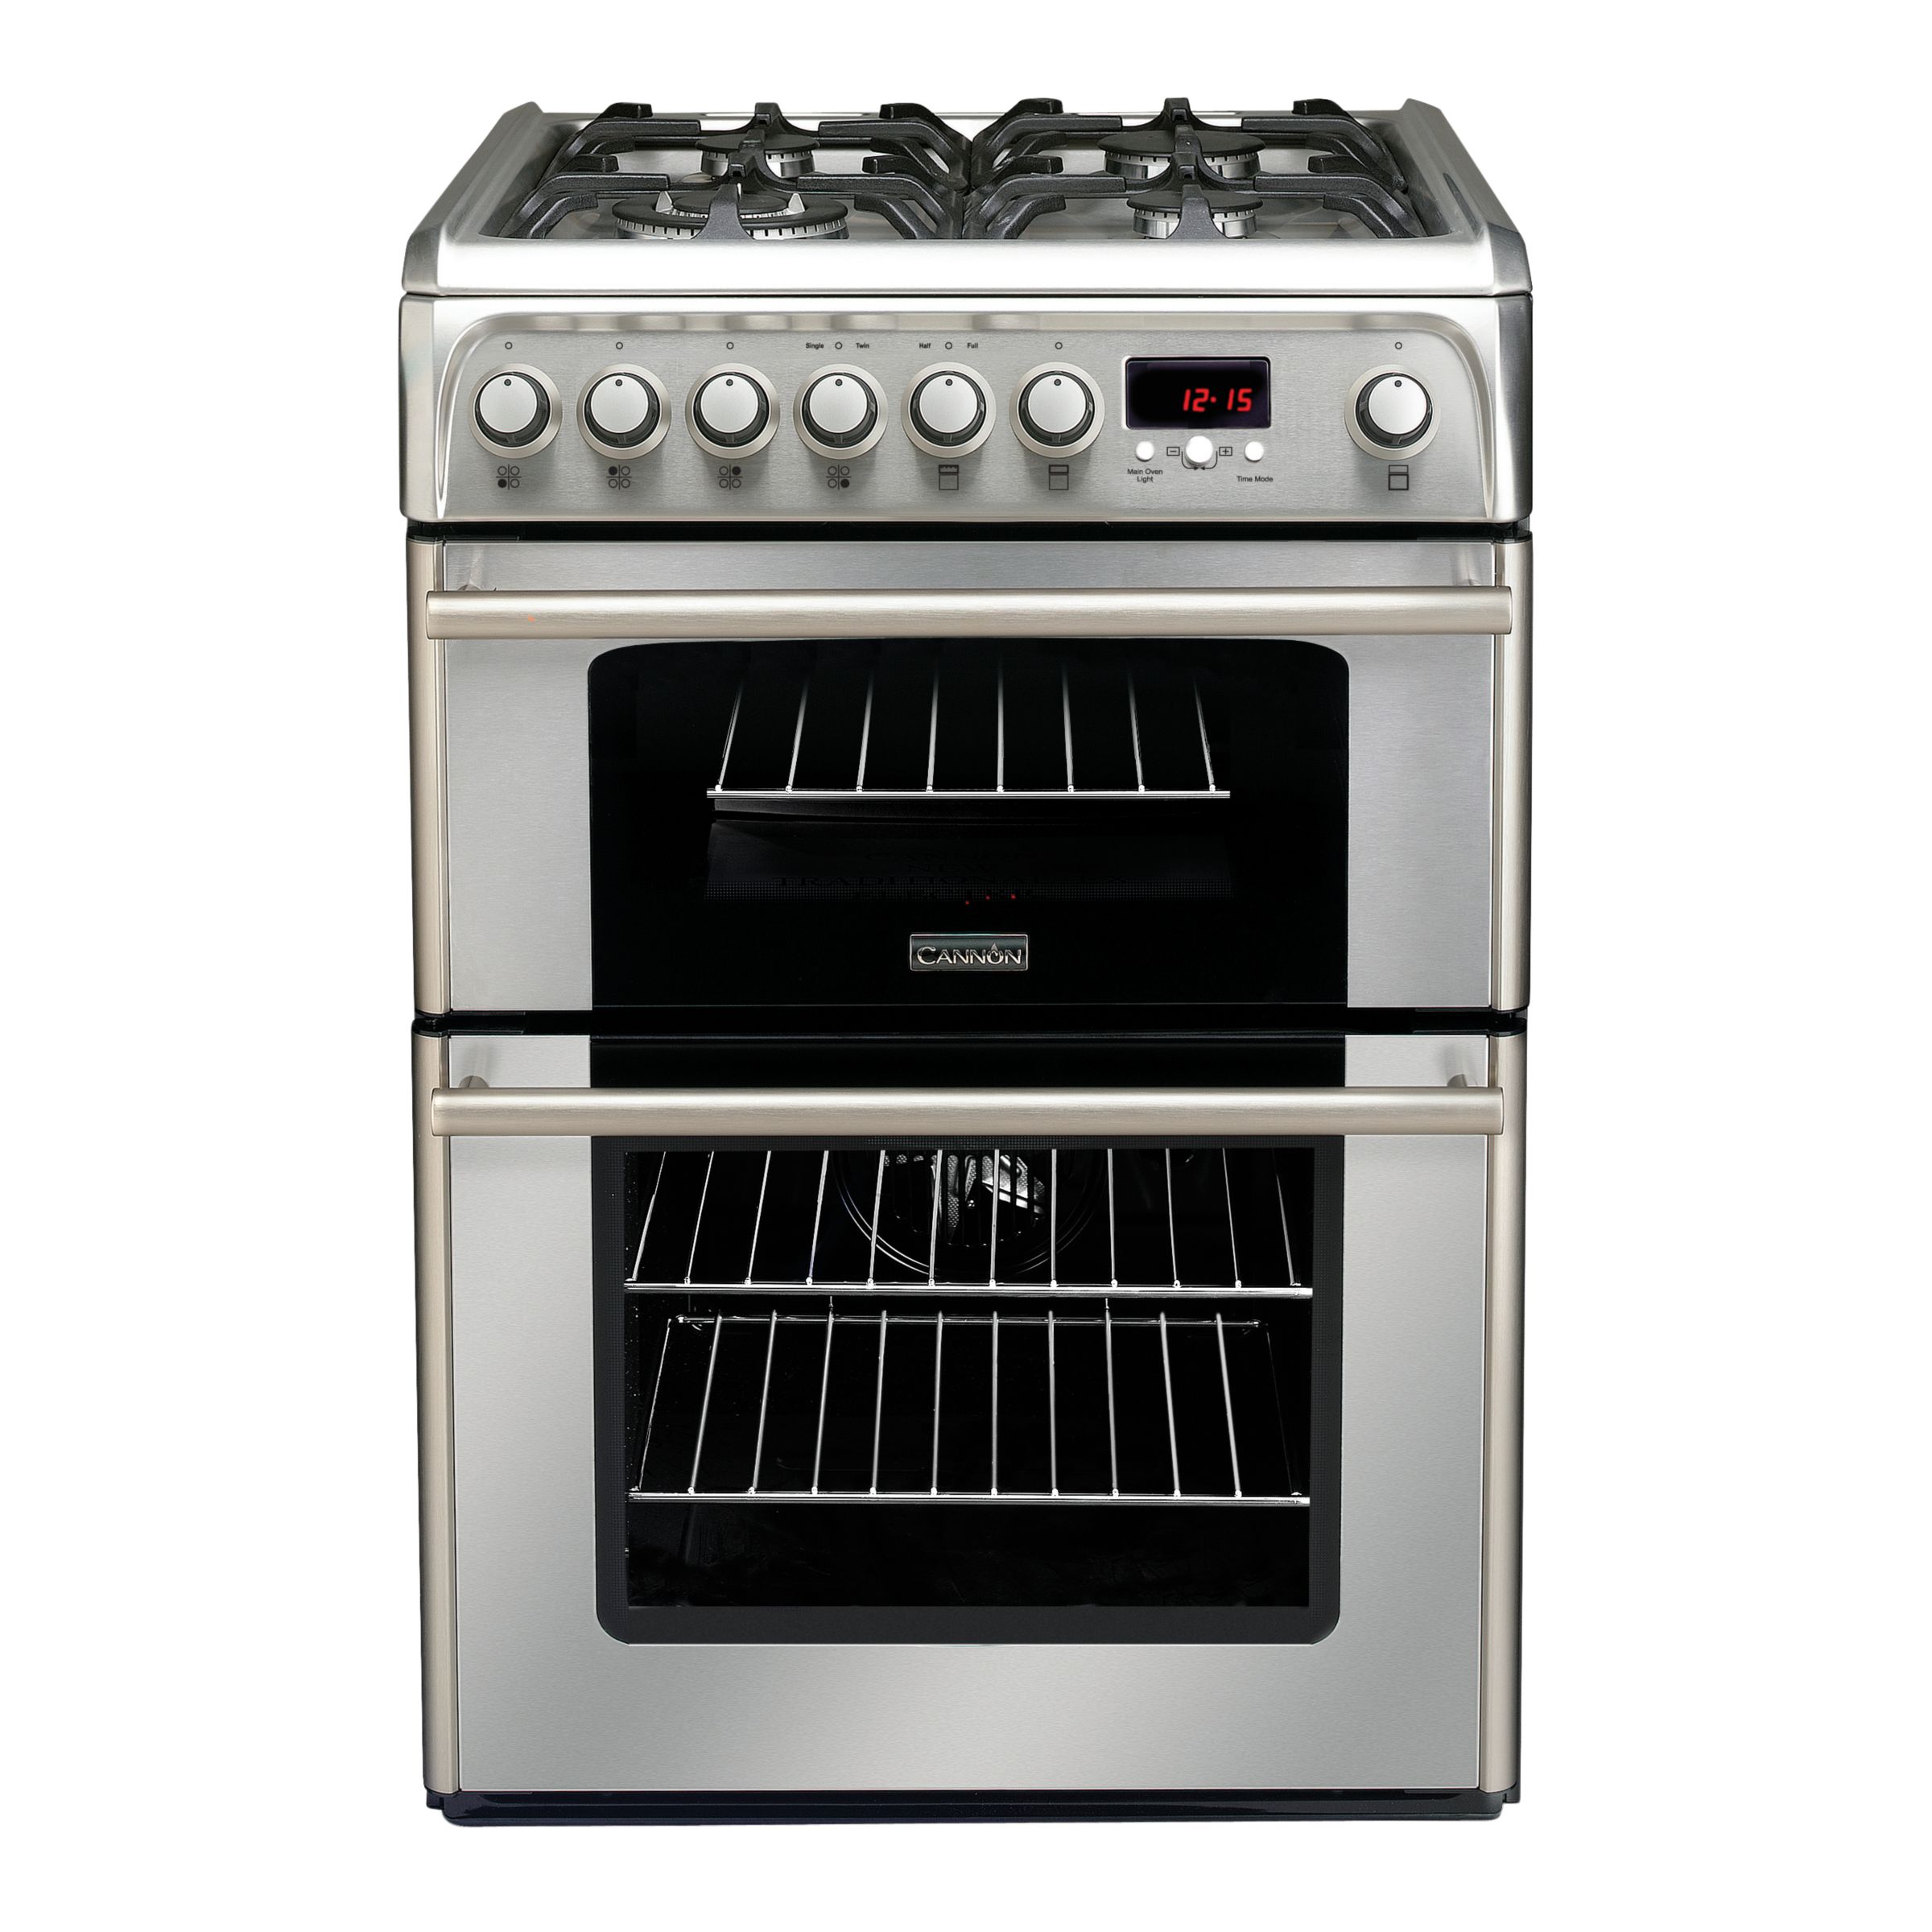 Cannon C60DPXF Dual Fuel Mini Range Cooker, Stainless Steel at John Lewis